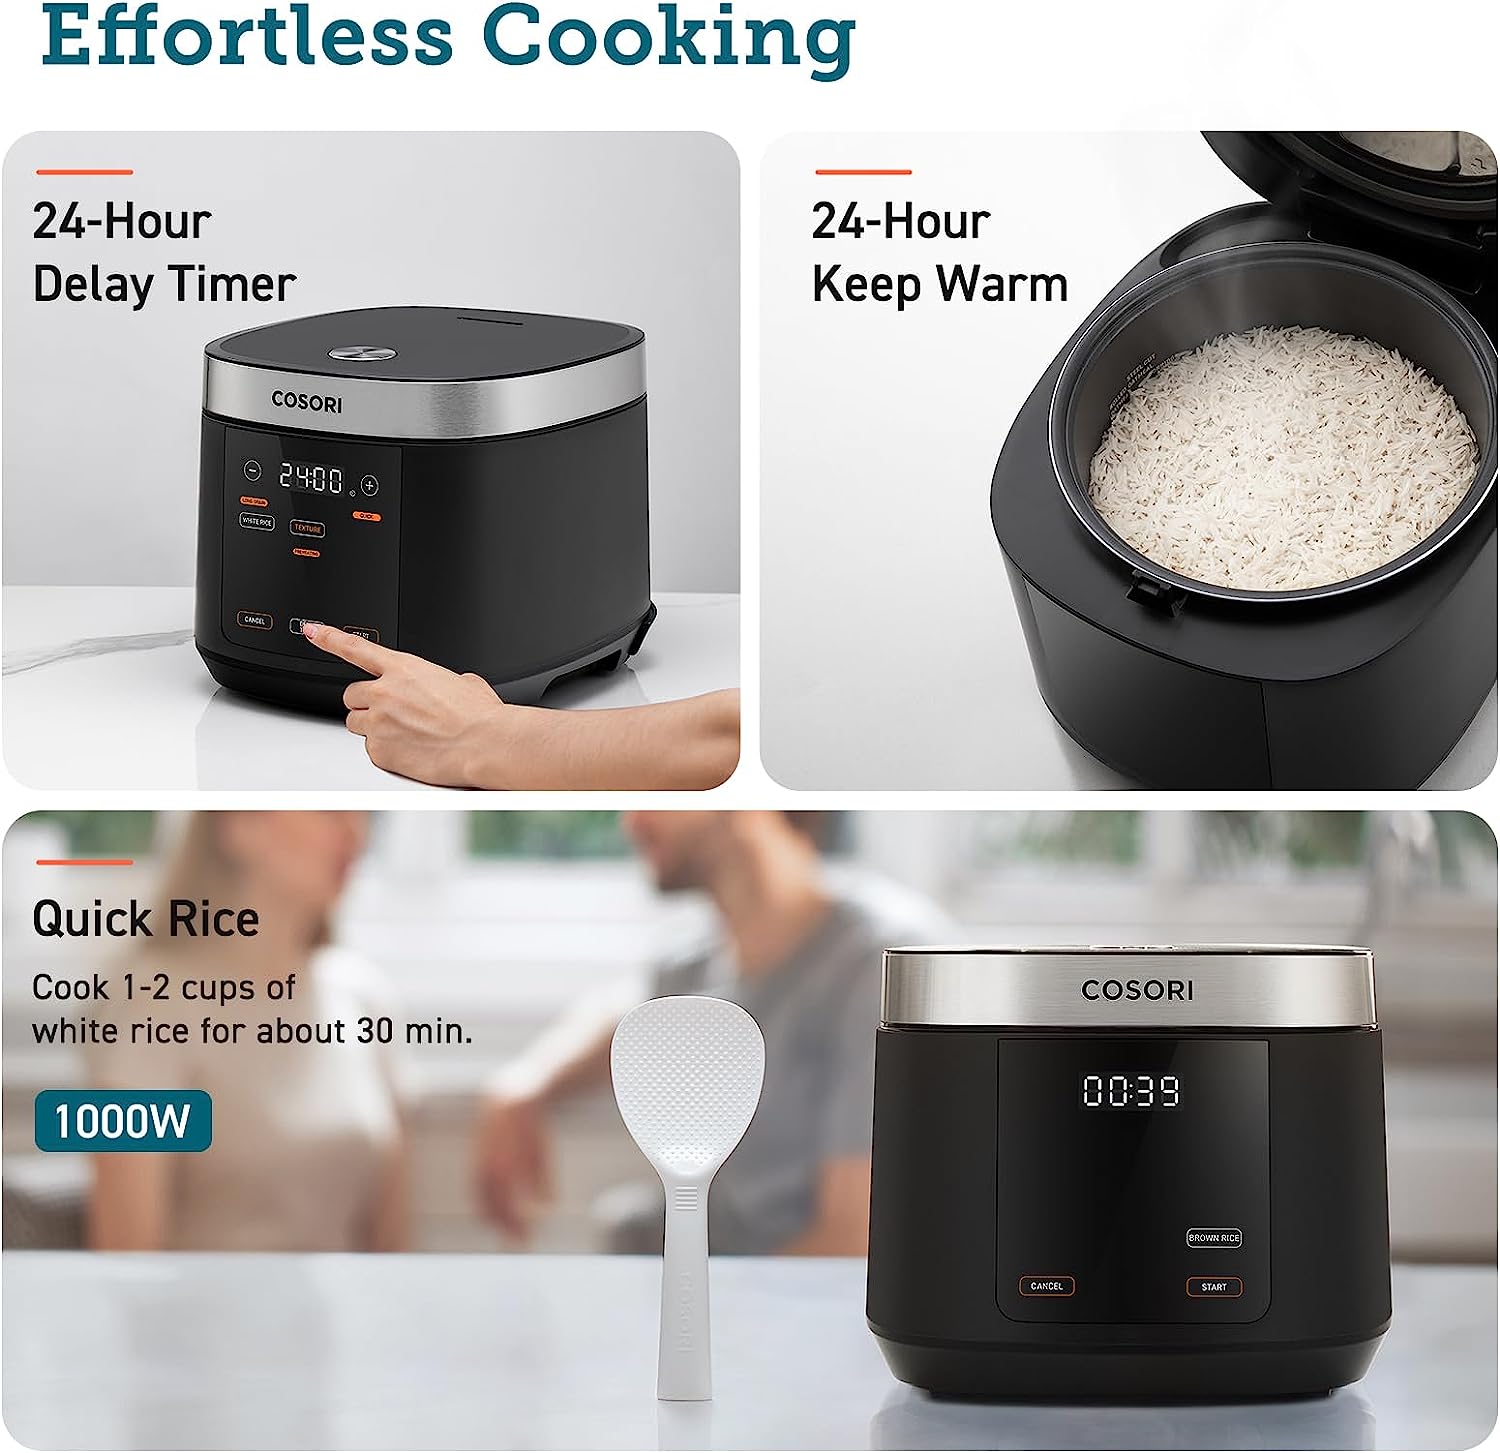 https://bigbigmart.com/wp-content/uploads/2023/07/COSORI-Rice-Cooker-Large-Maker-10-Cup-Uncooked-18-Functions-Japanese-Style-Fuzzy-Logic-Micom-Technology-Texture-Optional-50-Recipes-Stainless-Steel-Steamer-Warmer-Timer-Olla-Arrocera-ElectricaBlack3.jpg